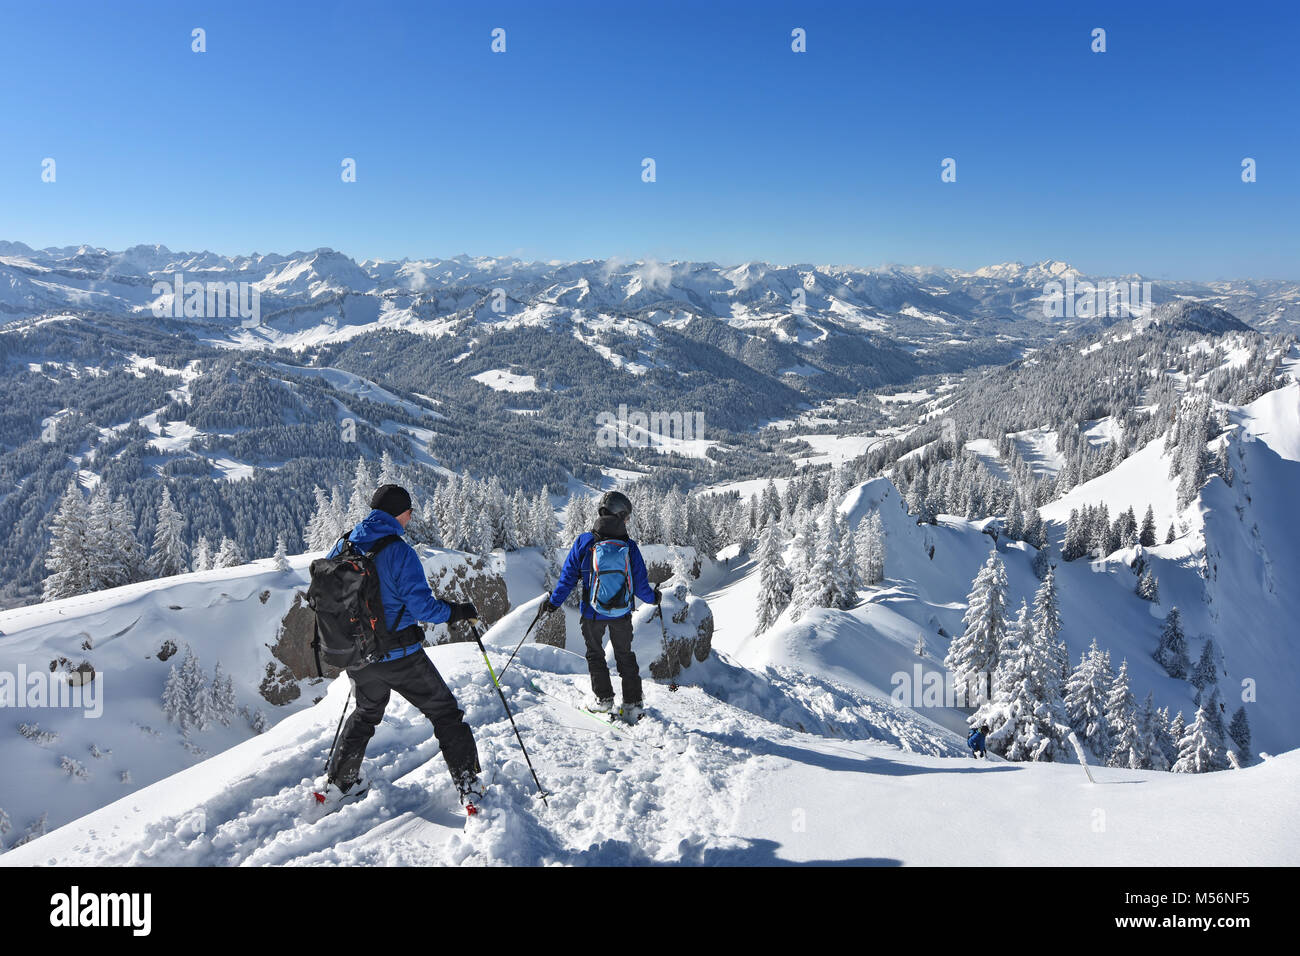 Two ski mountaineers are beginning their descent from the summit of Siplingerkopf (Allgaeu Alps) at a beautiful winter day. Bavaria, Germany Stock Photo